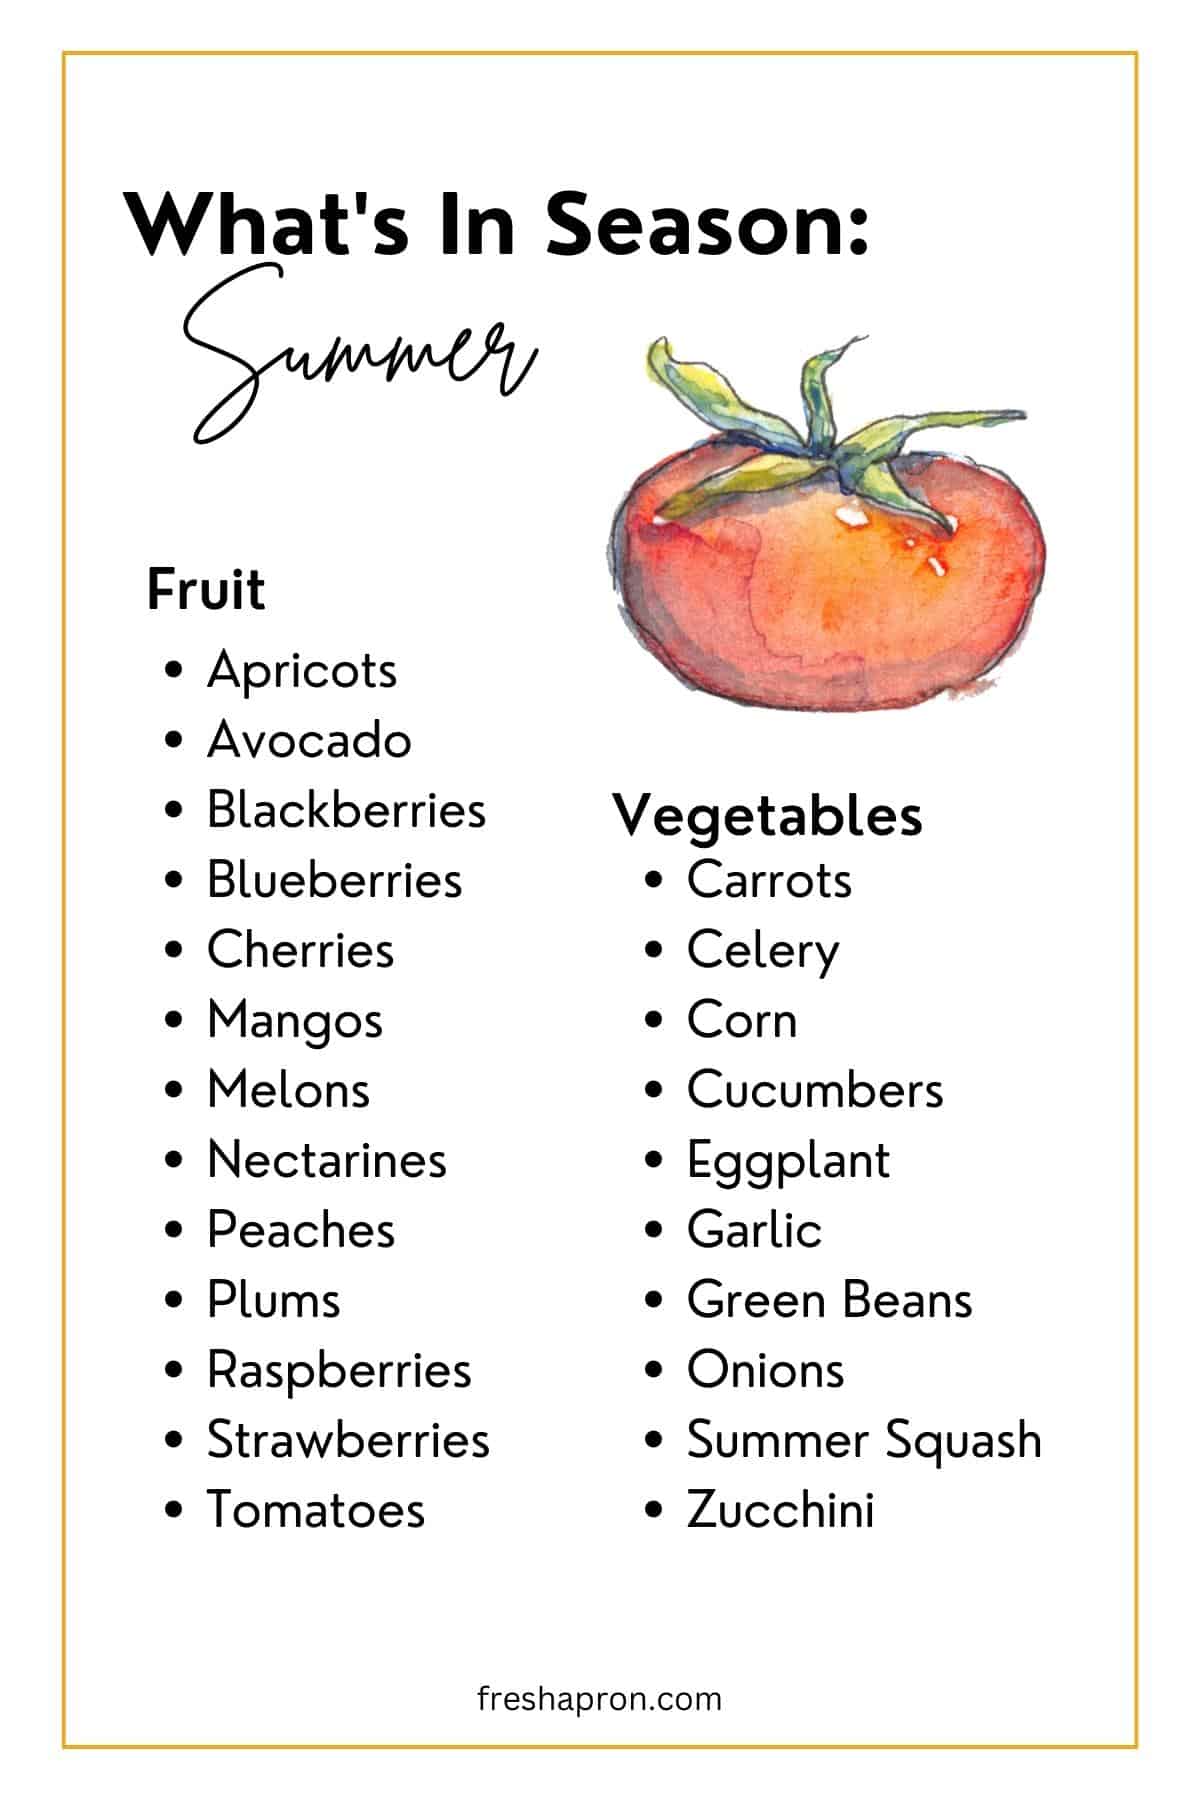 What's in Season in Summer produce guide.